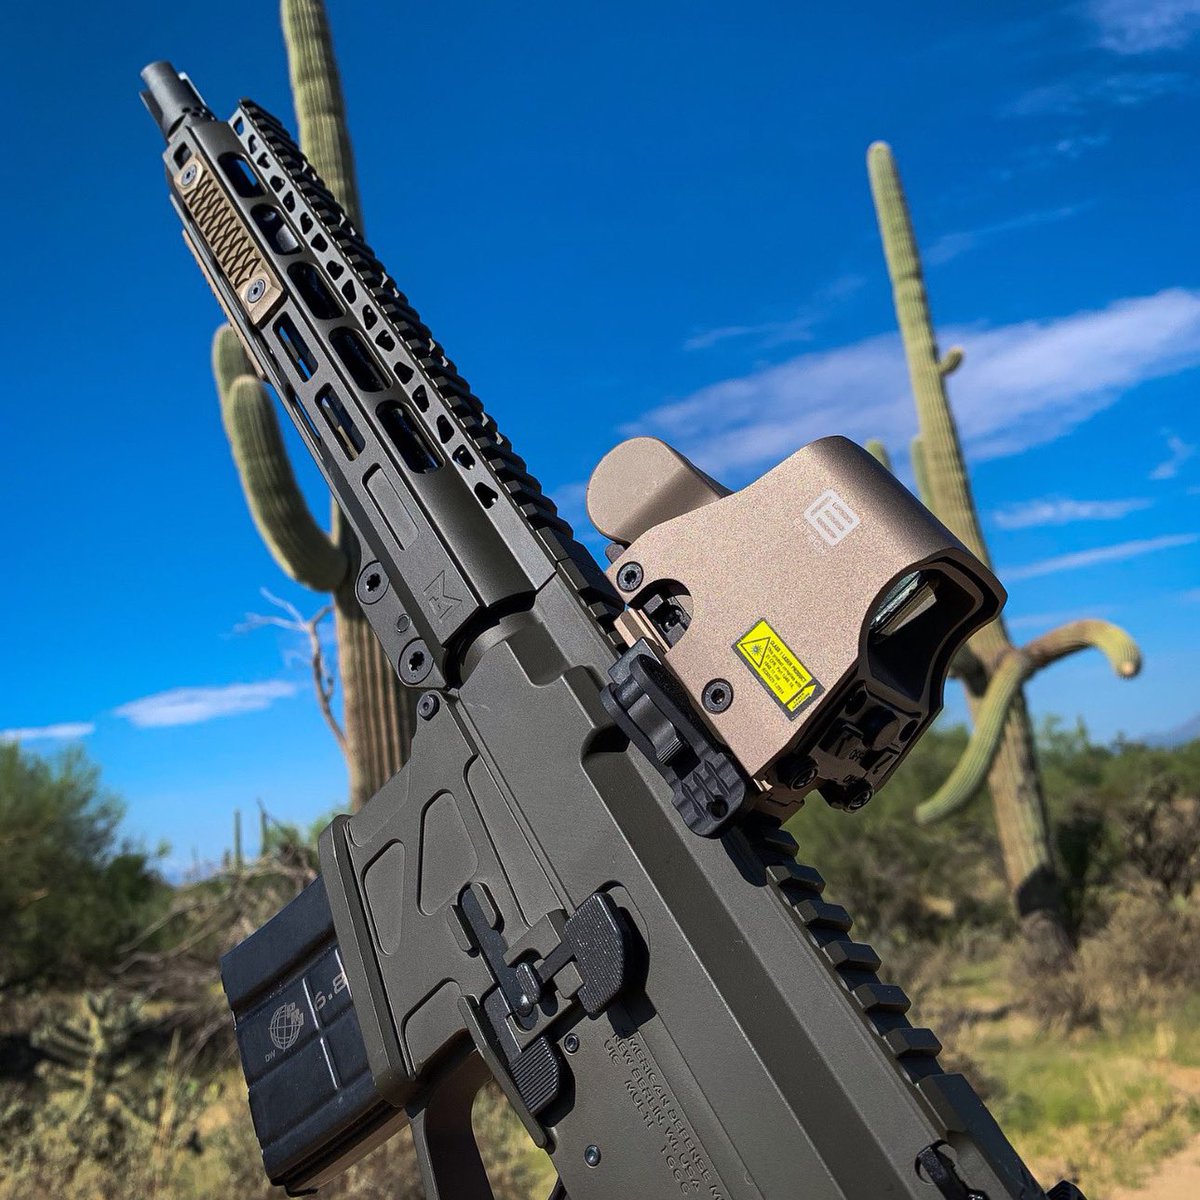 This is cactus camo...no, it’s really just a world-class green rifle from American Defense Manufacturing. But you know, got to say funny things on social. #EOTECH #HWSHOTNESS #ADM